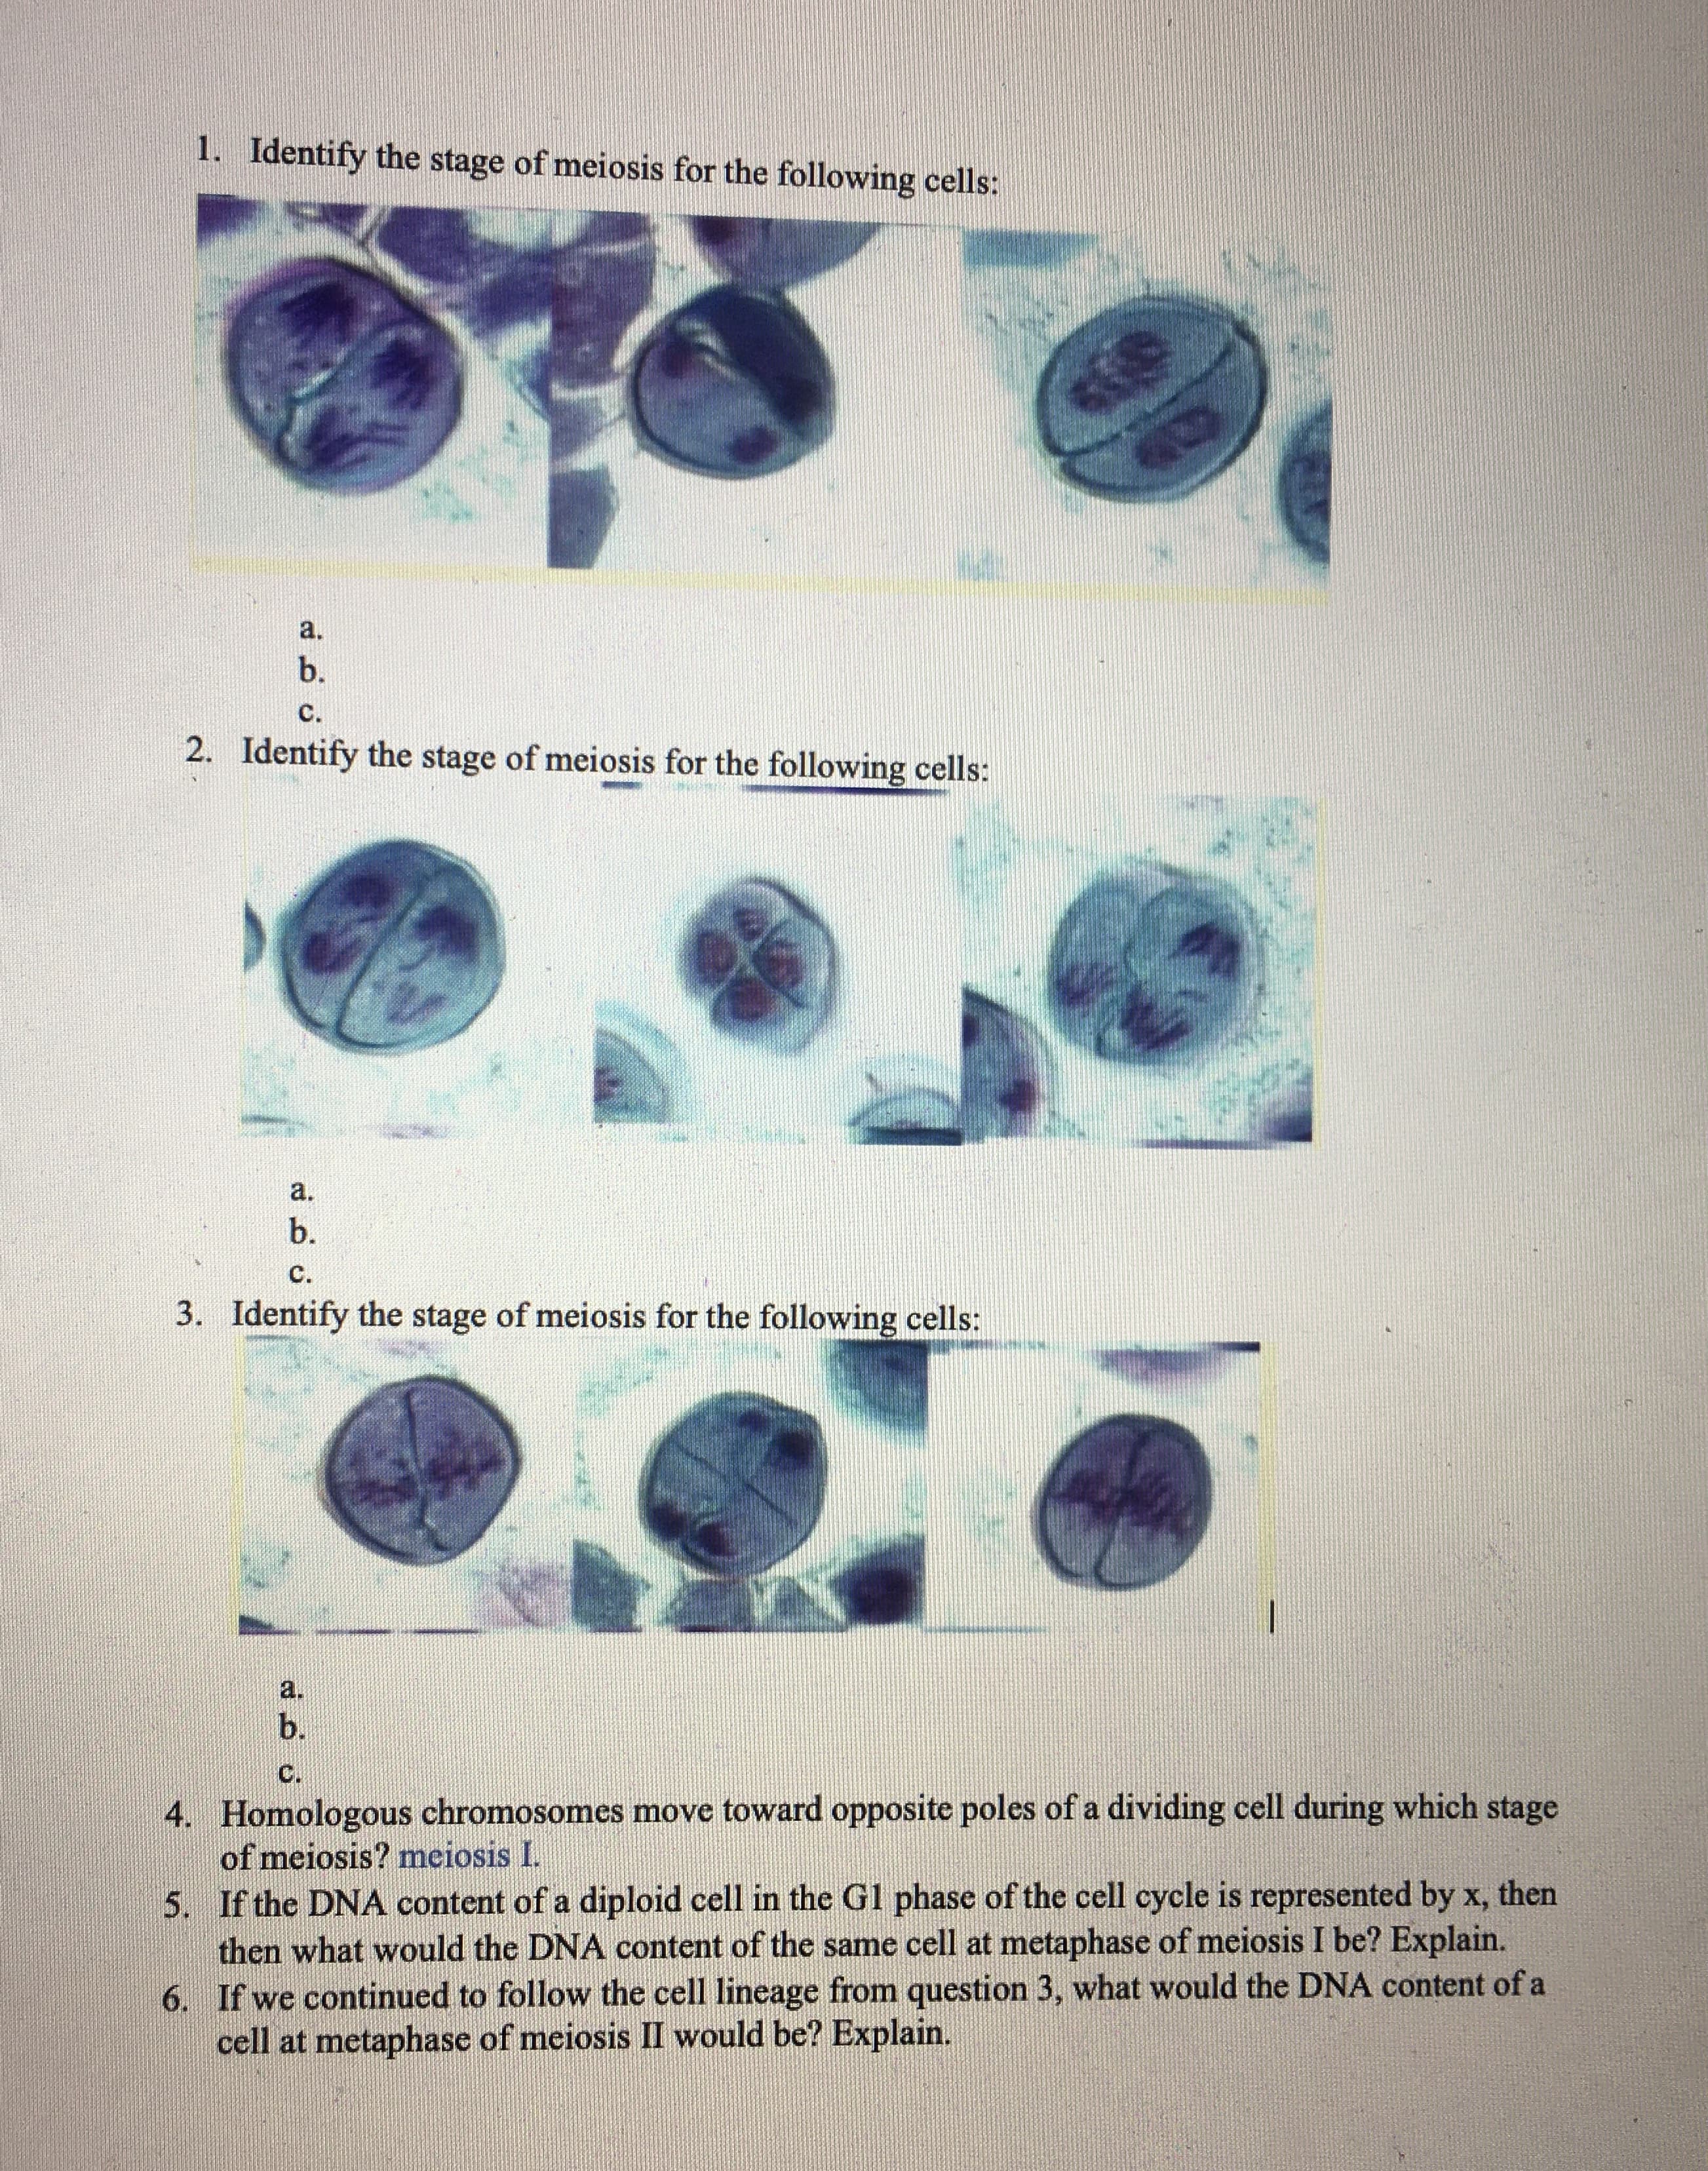 1. Identify the stage of meiosis for the following cells:
a.
